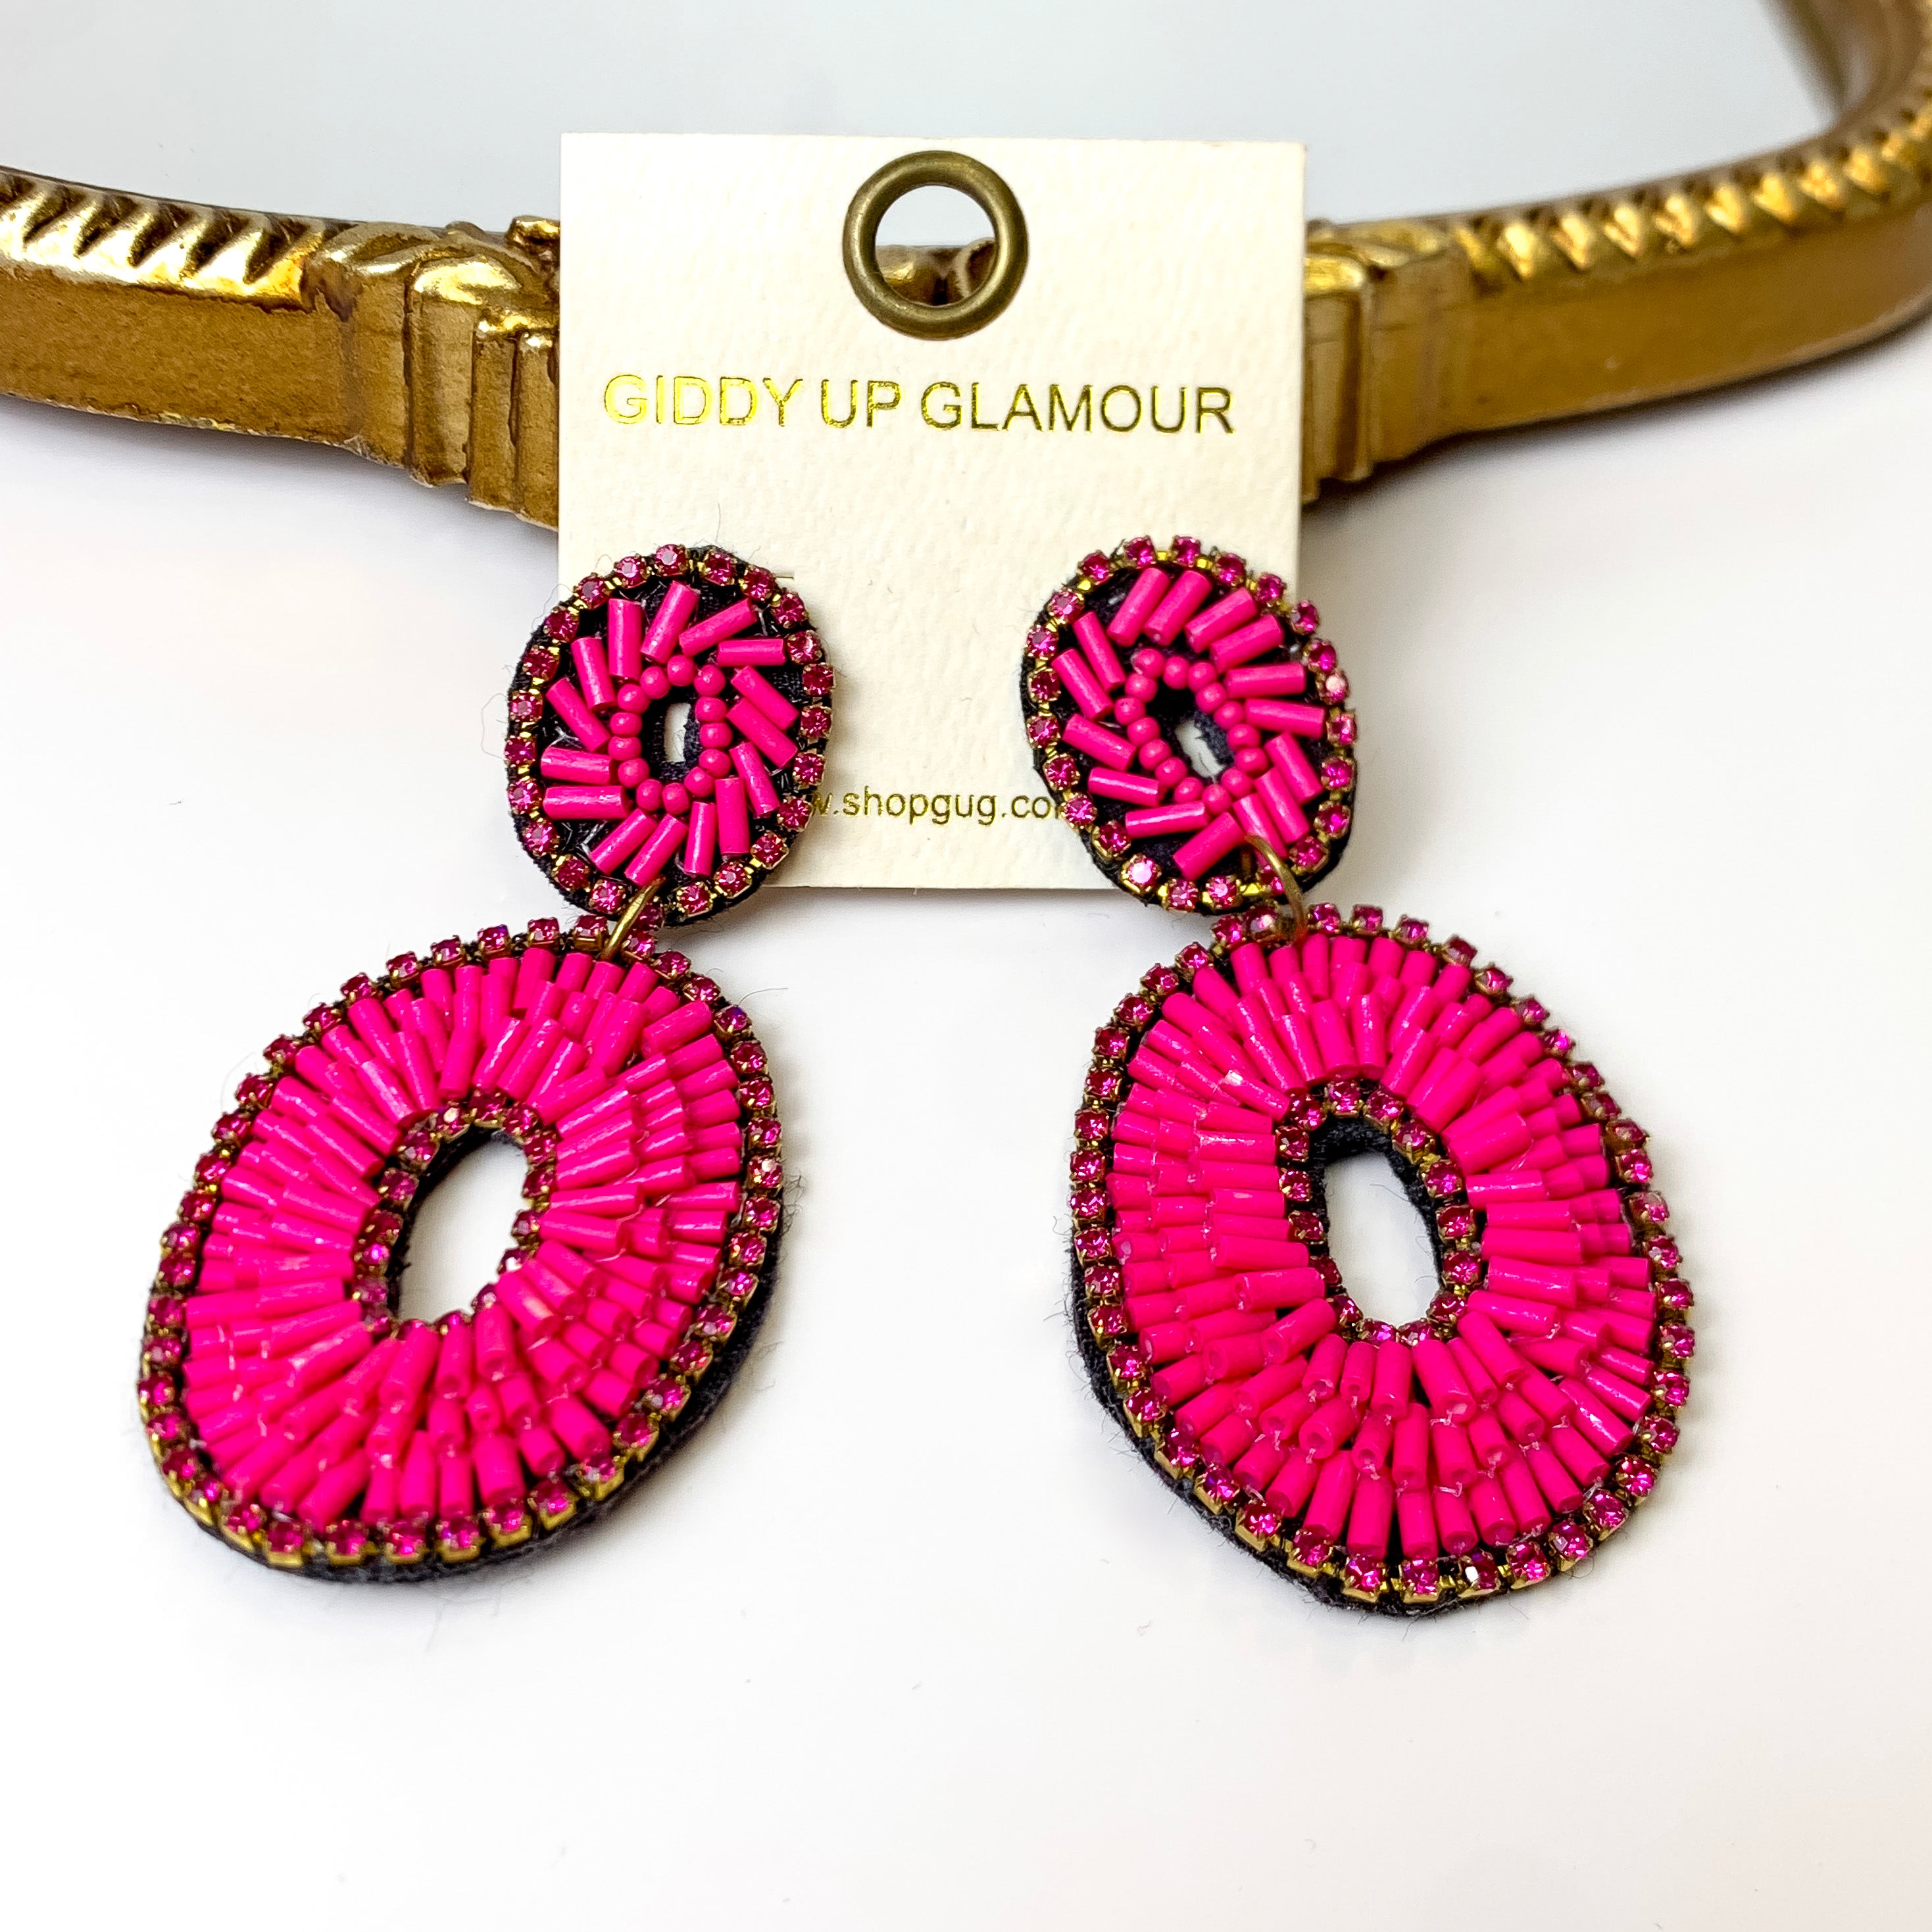 Bugle Bead Oval Earrings in Fuchsia Pink - Giddy Up Glamour Boutique